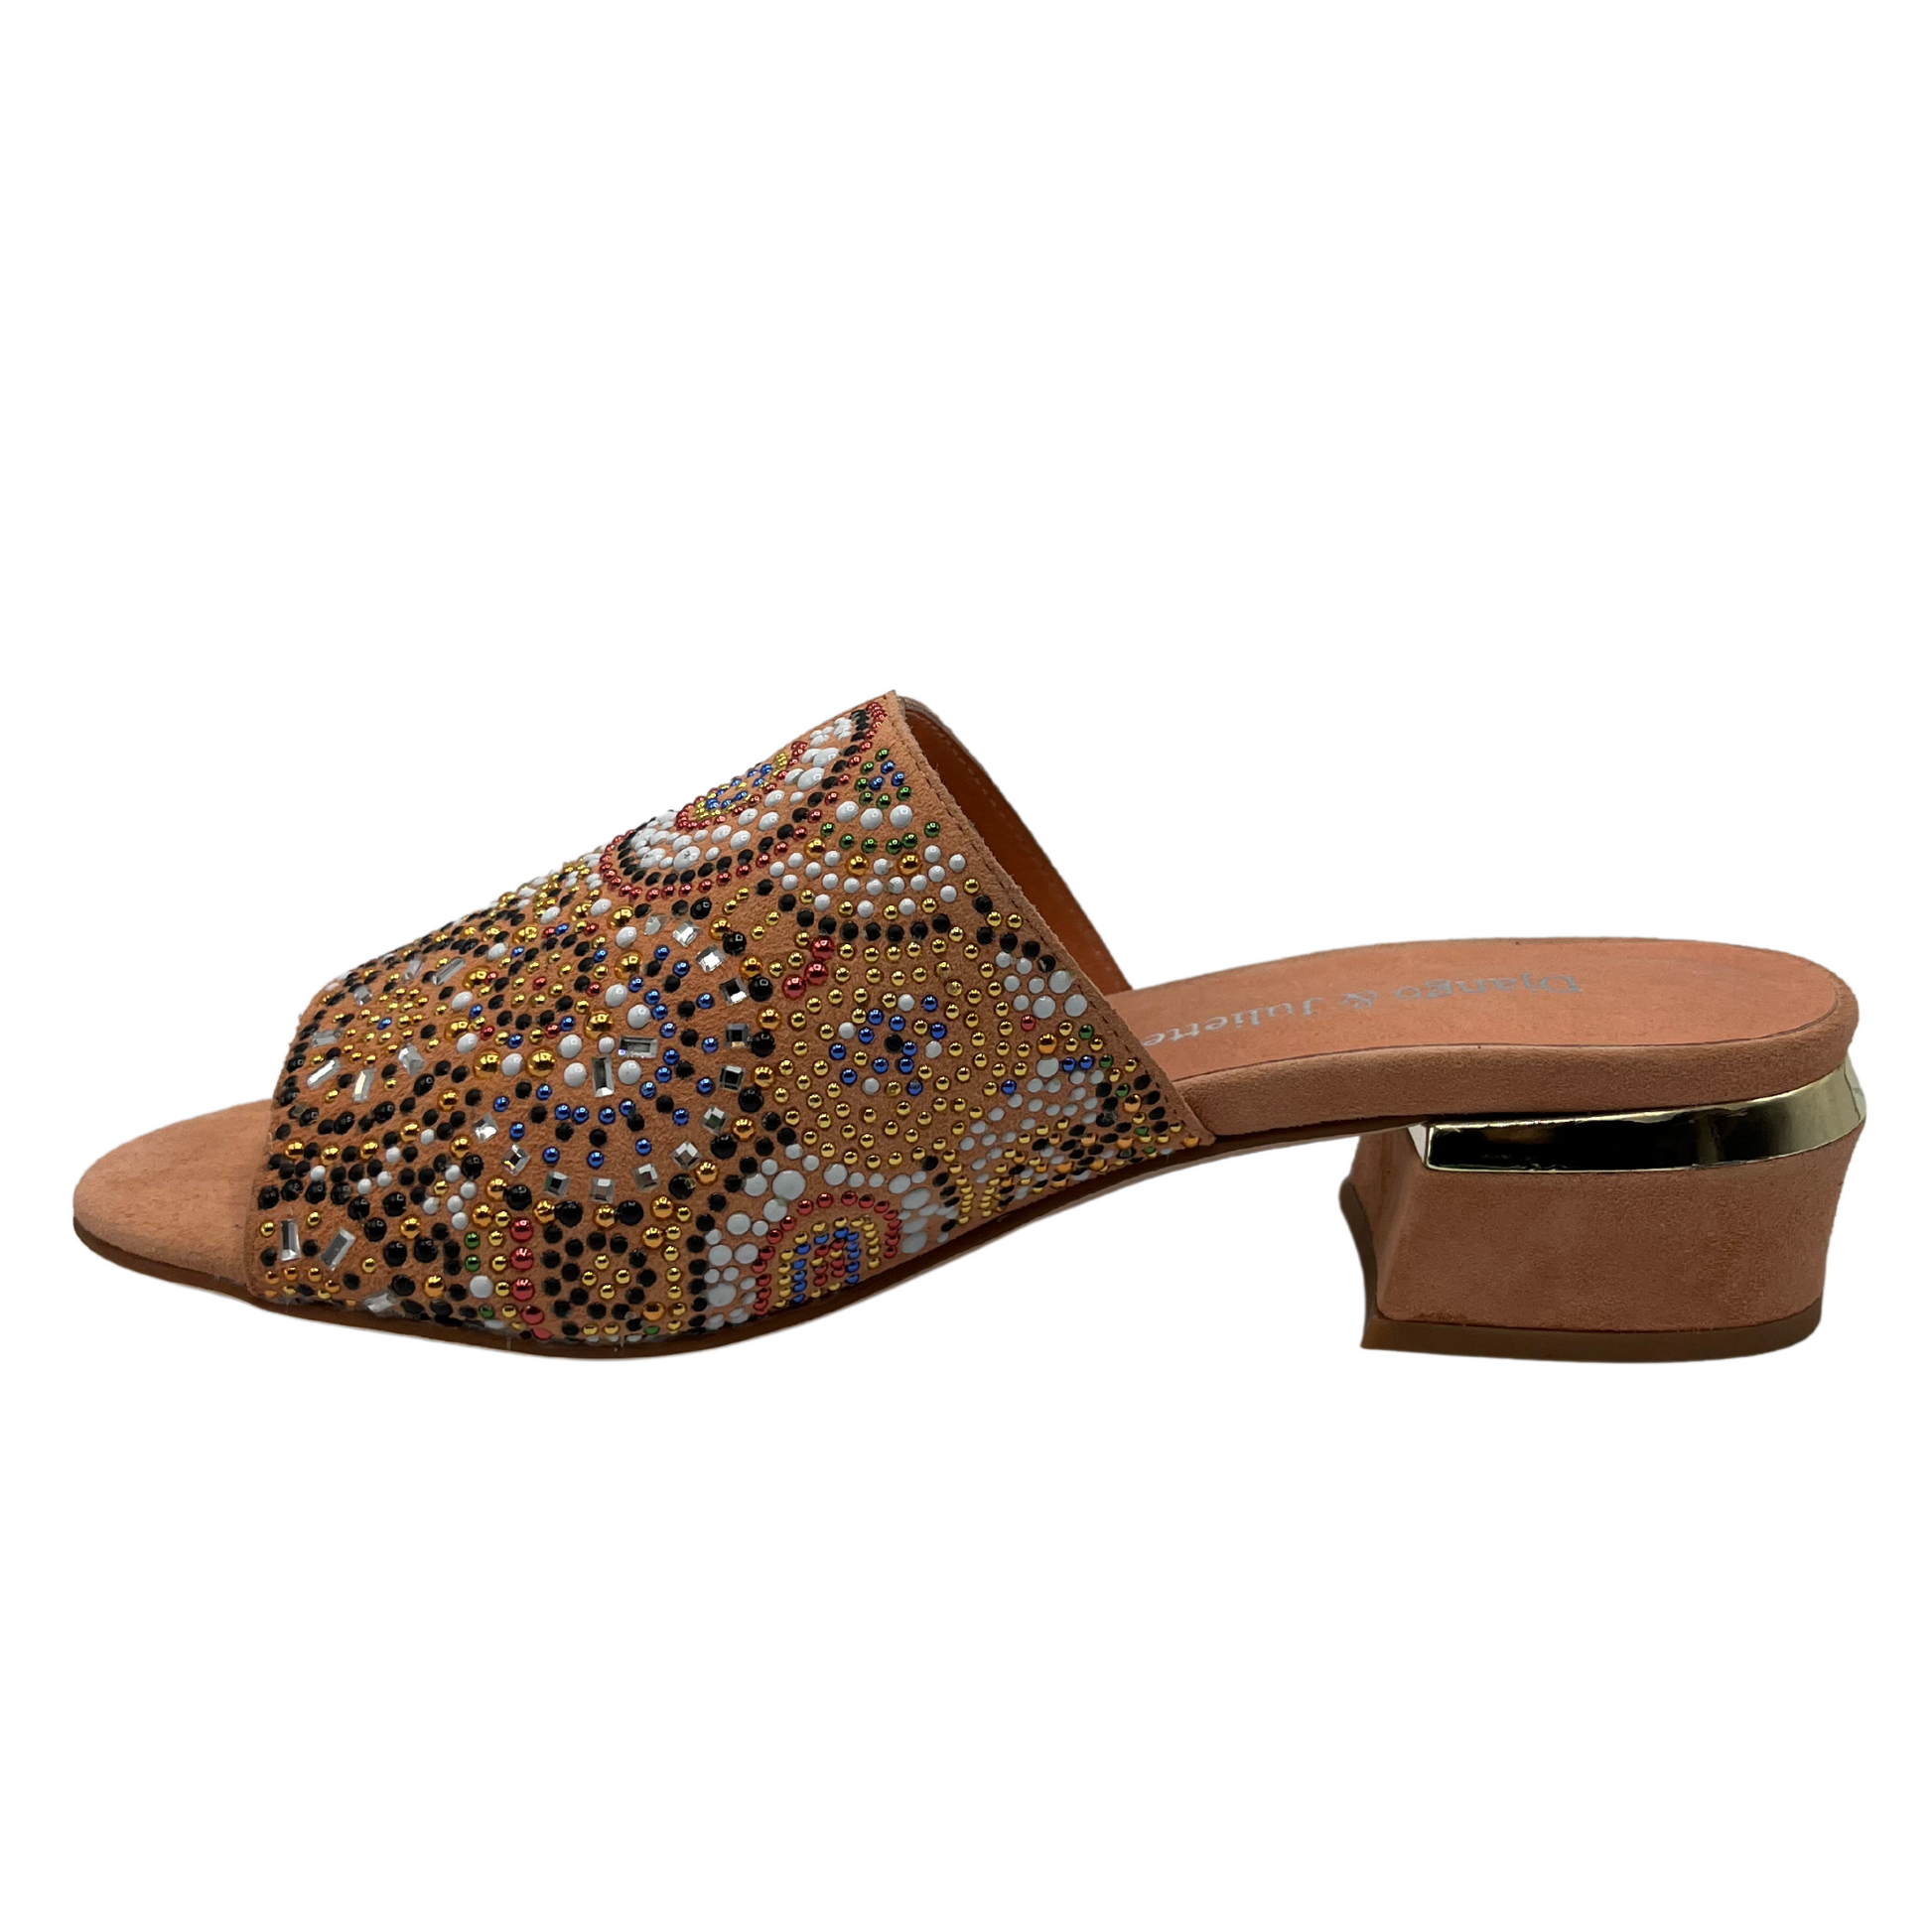 Left facing view of salmon coloured mule sandal with beaded detail on upper and block heel